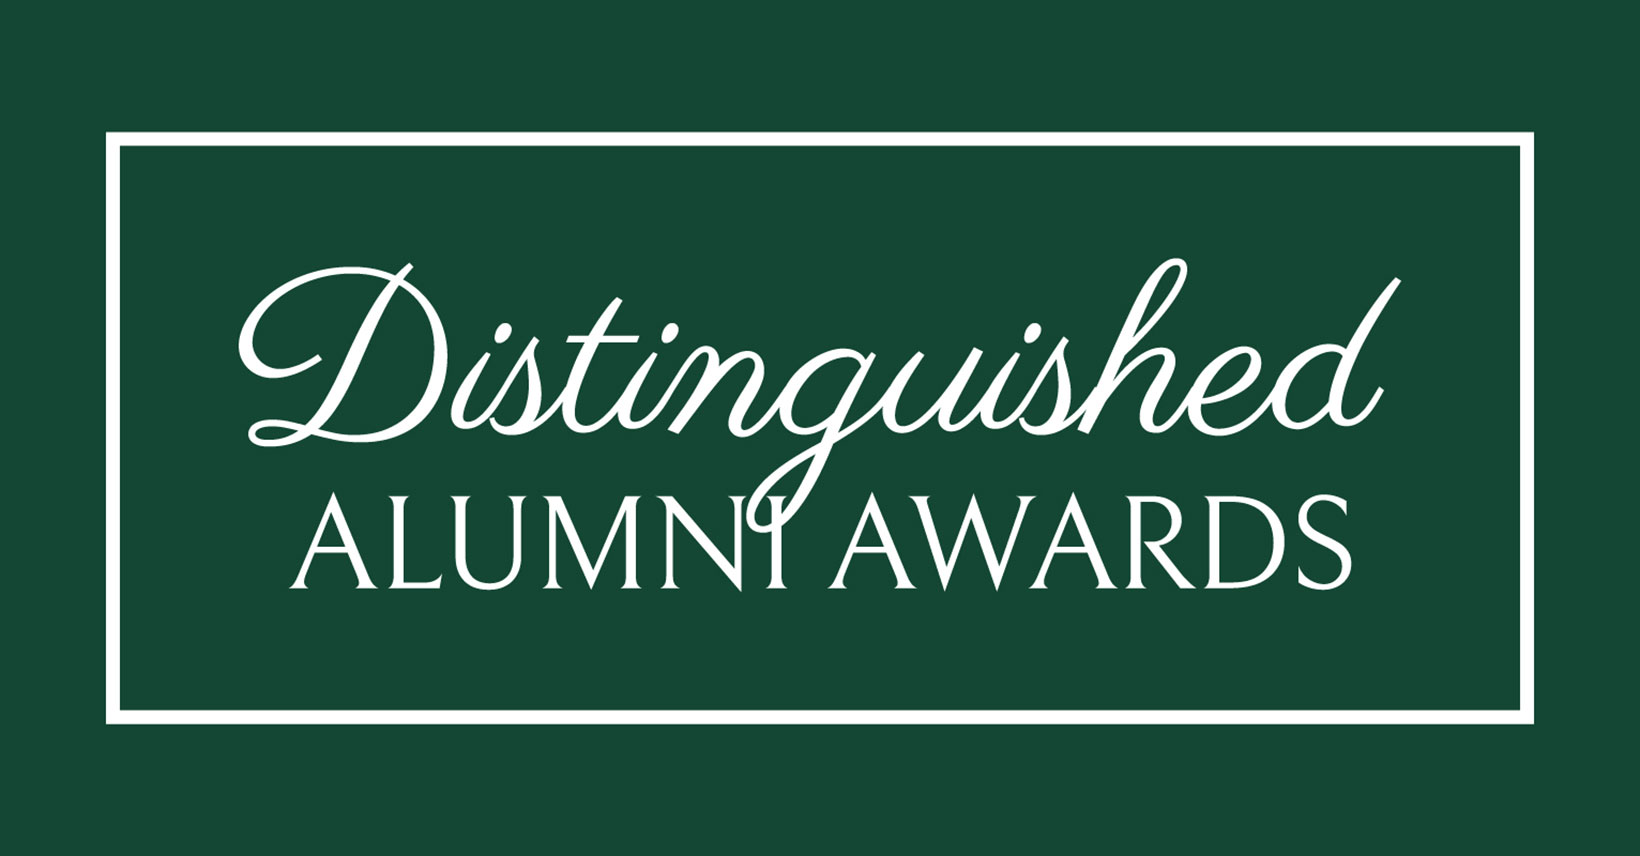 Eight to receive Distinguished Alumni Awards from UWParkside